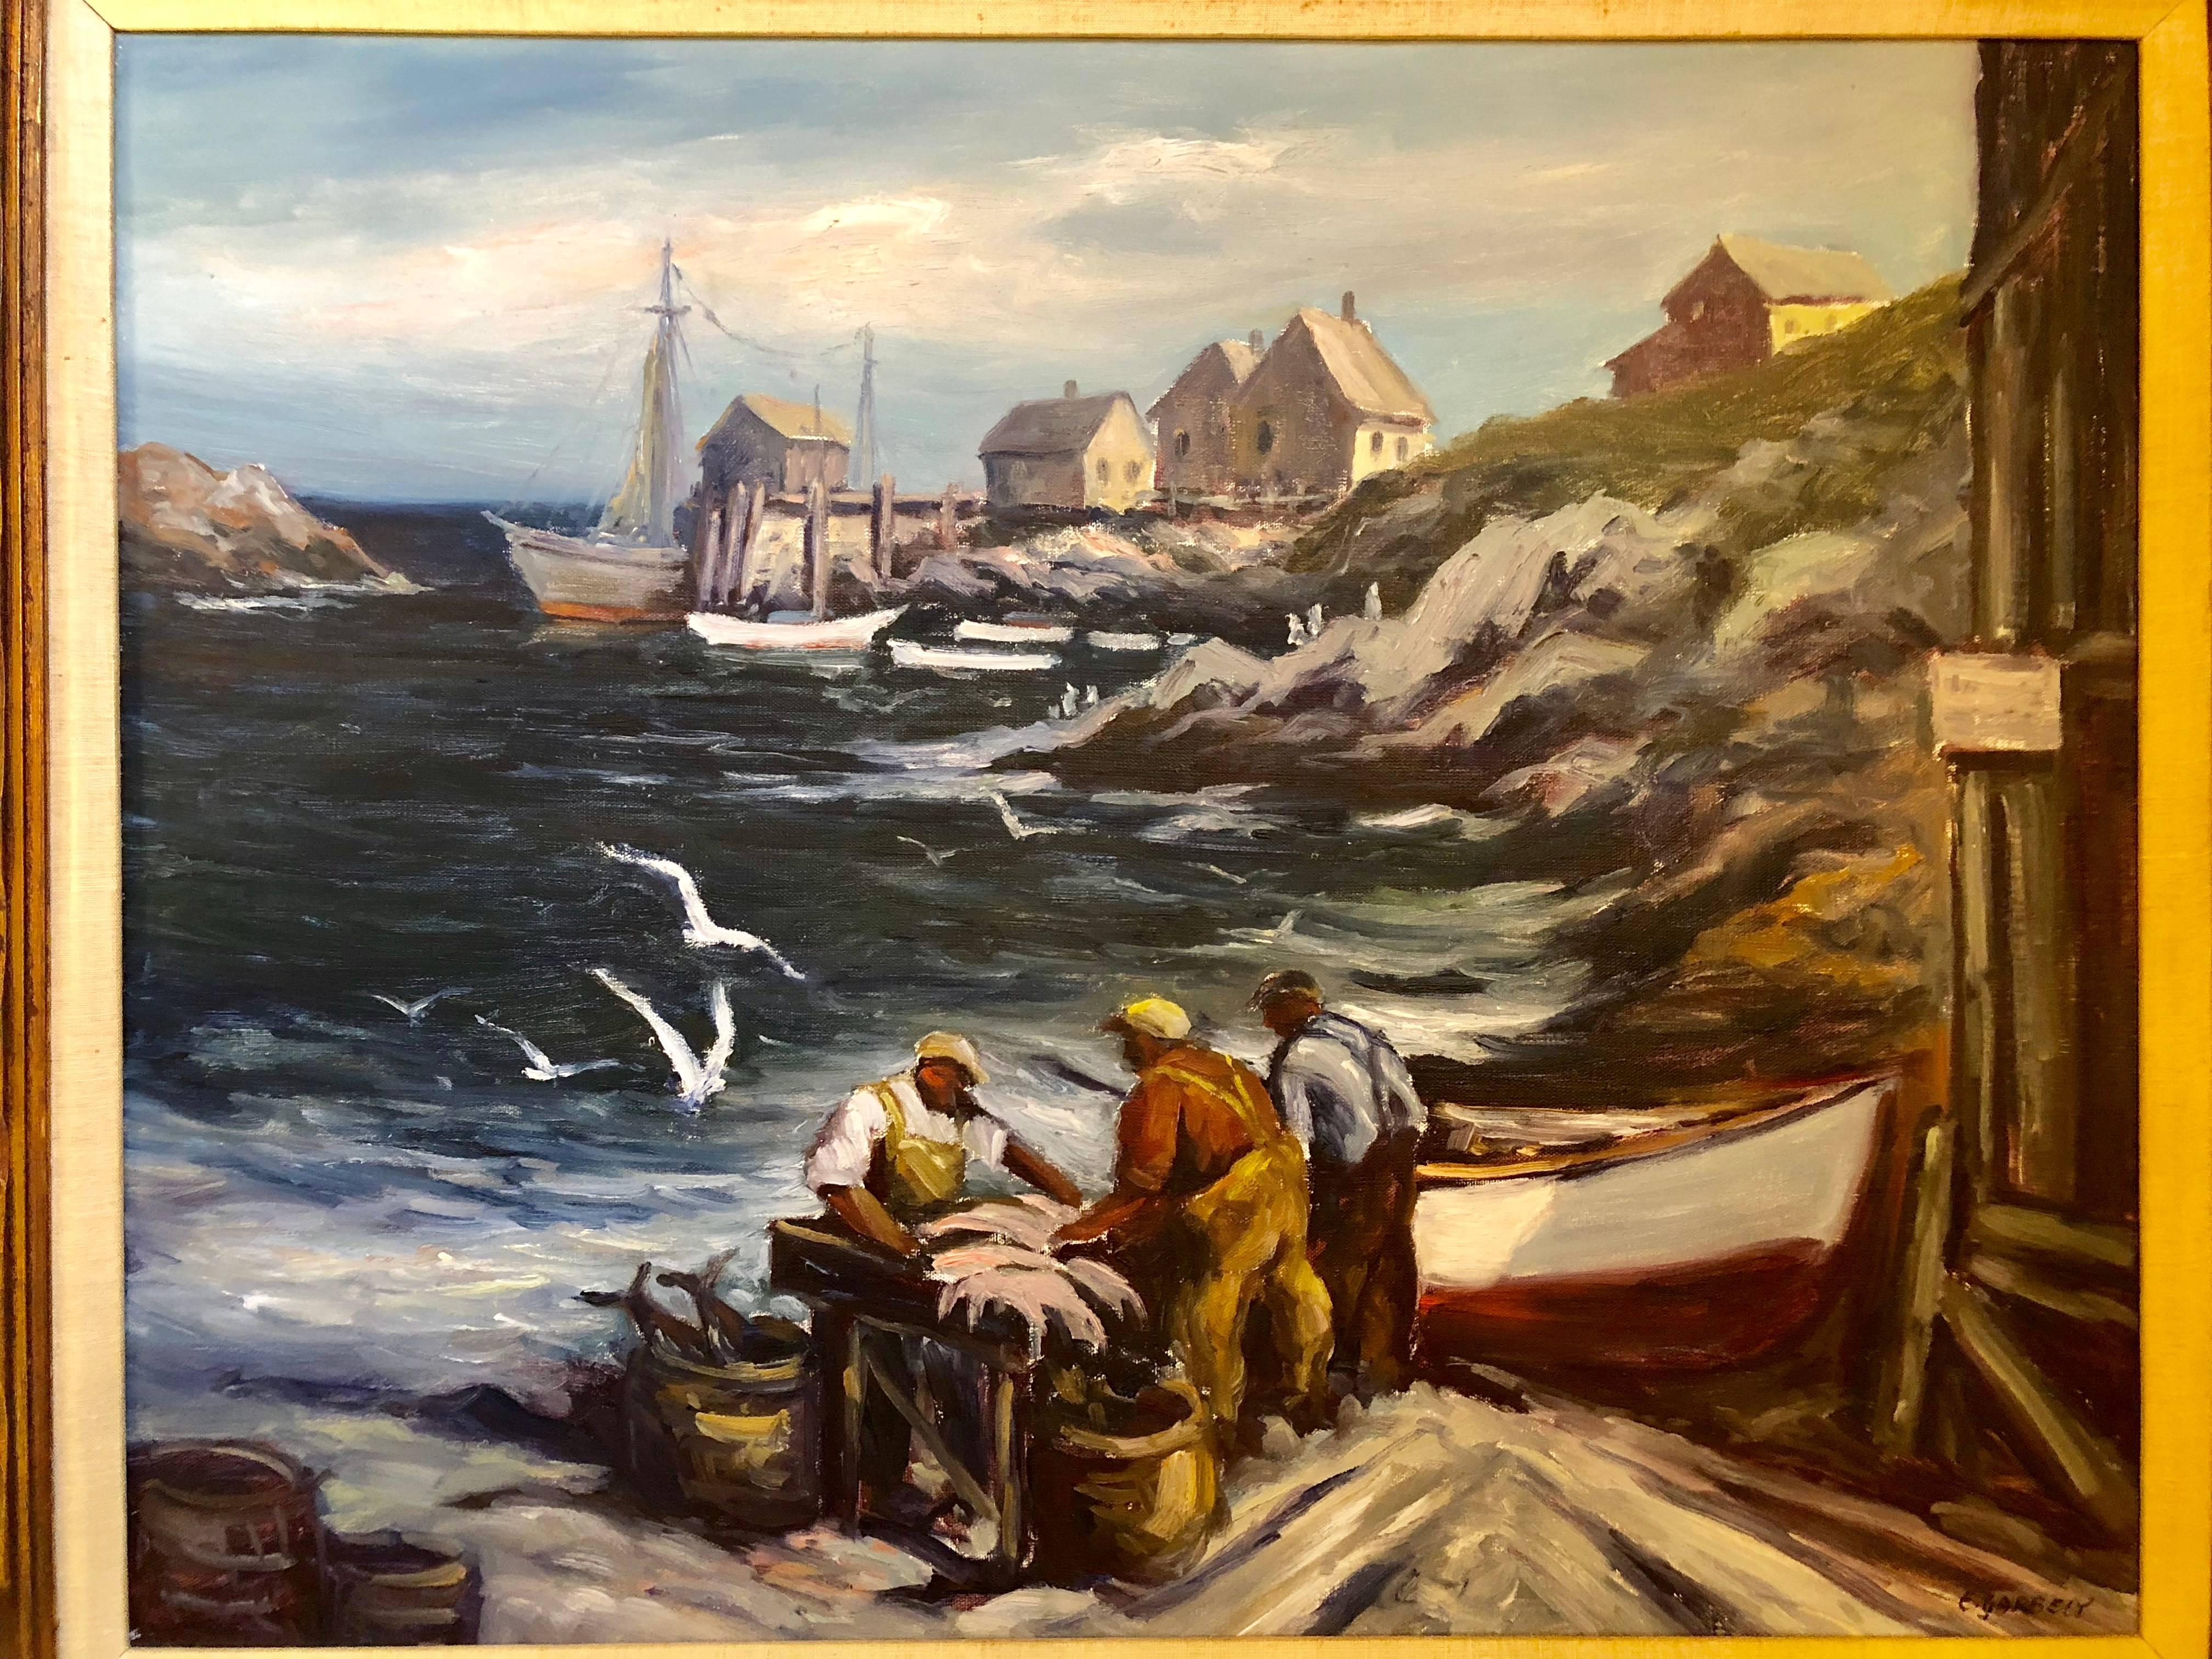 Signed oil on canvas by T. Garbely Harbor scene. A wonderfully detained framed oil on canvas by this listed artist.
Biography Edward Garbely
Edward Garbely (1908-1999)
Edward Garbely was born on August 15, 1908 in Newark, New Jersey. He was best